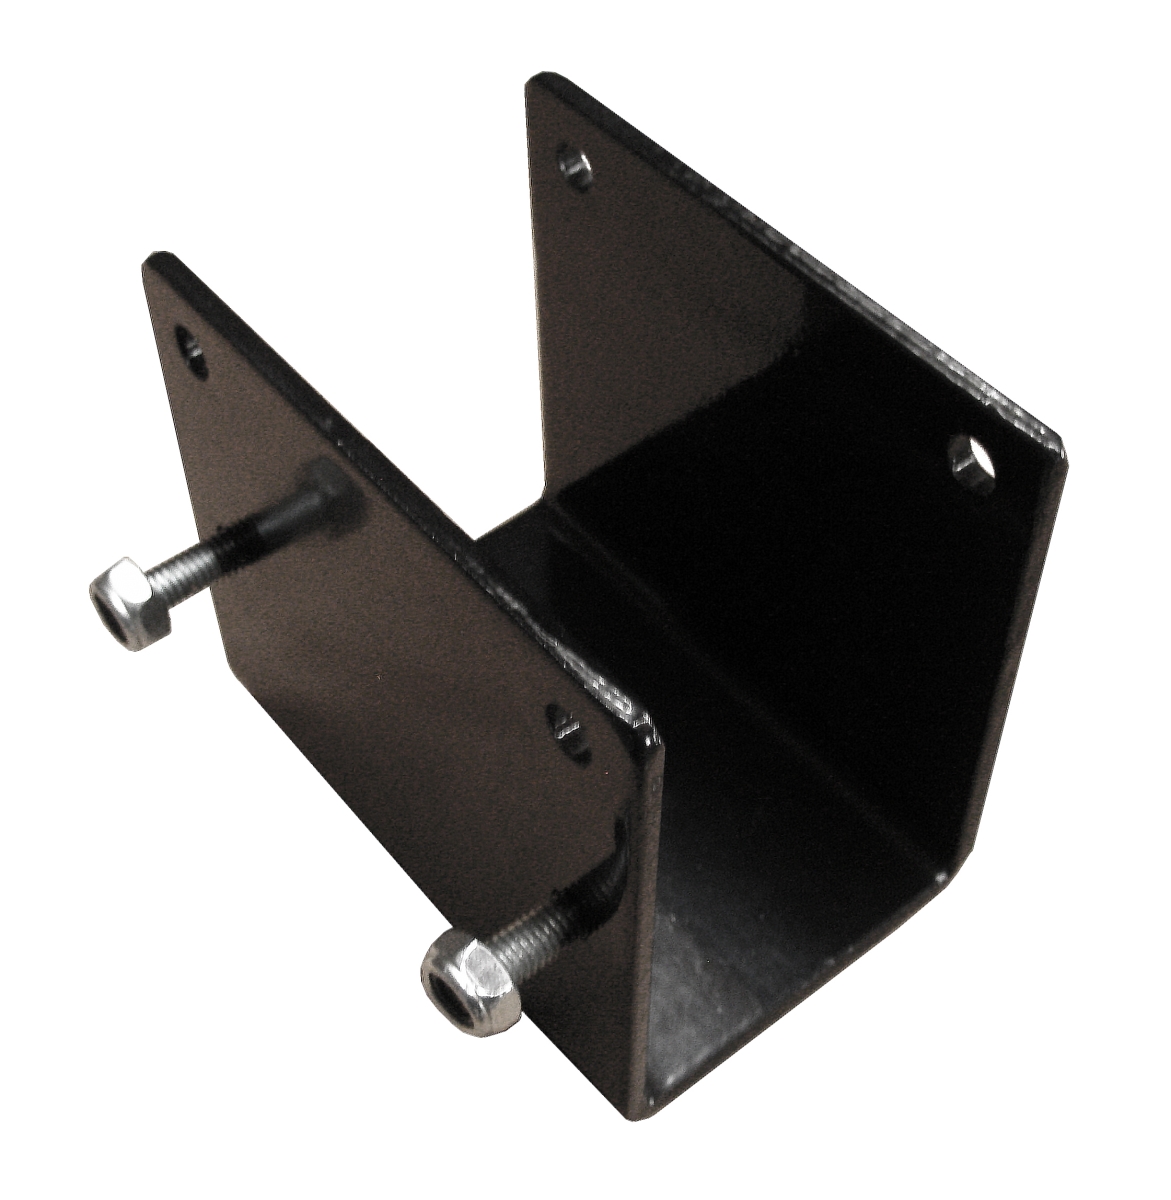 Picture of Tow Tuff TTF-ICSTC Steel Powder-Coat Ice Castle Bracket for Spare Tire Carrier